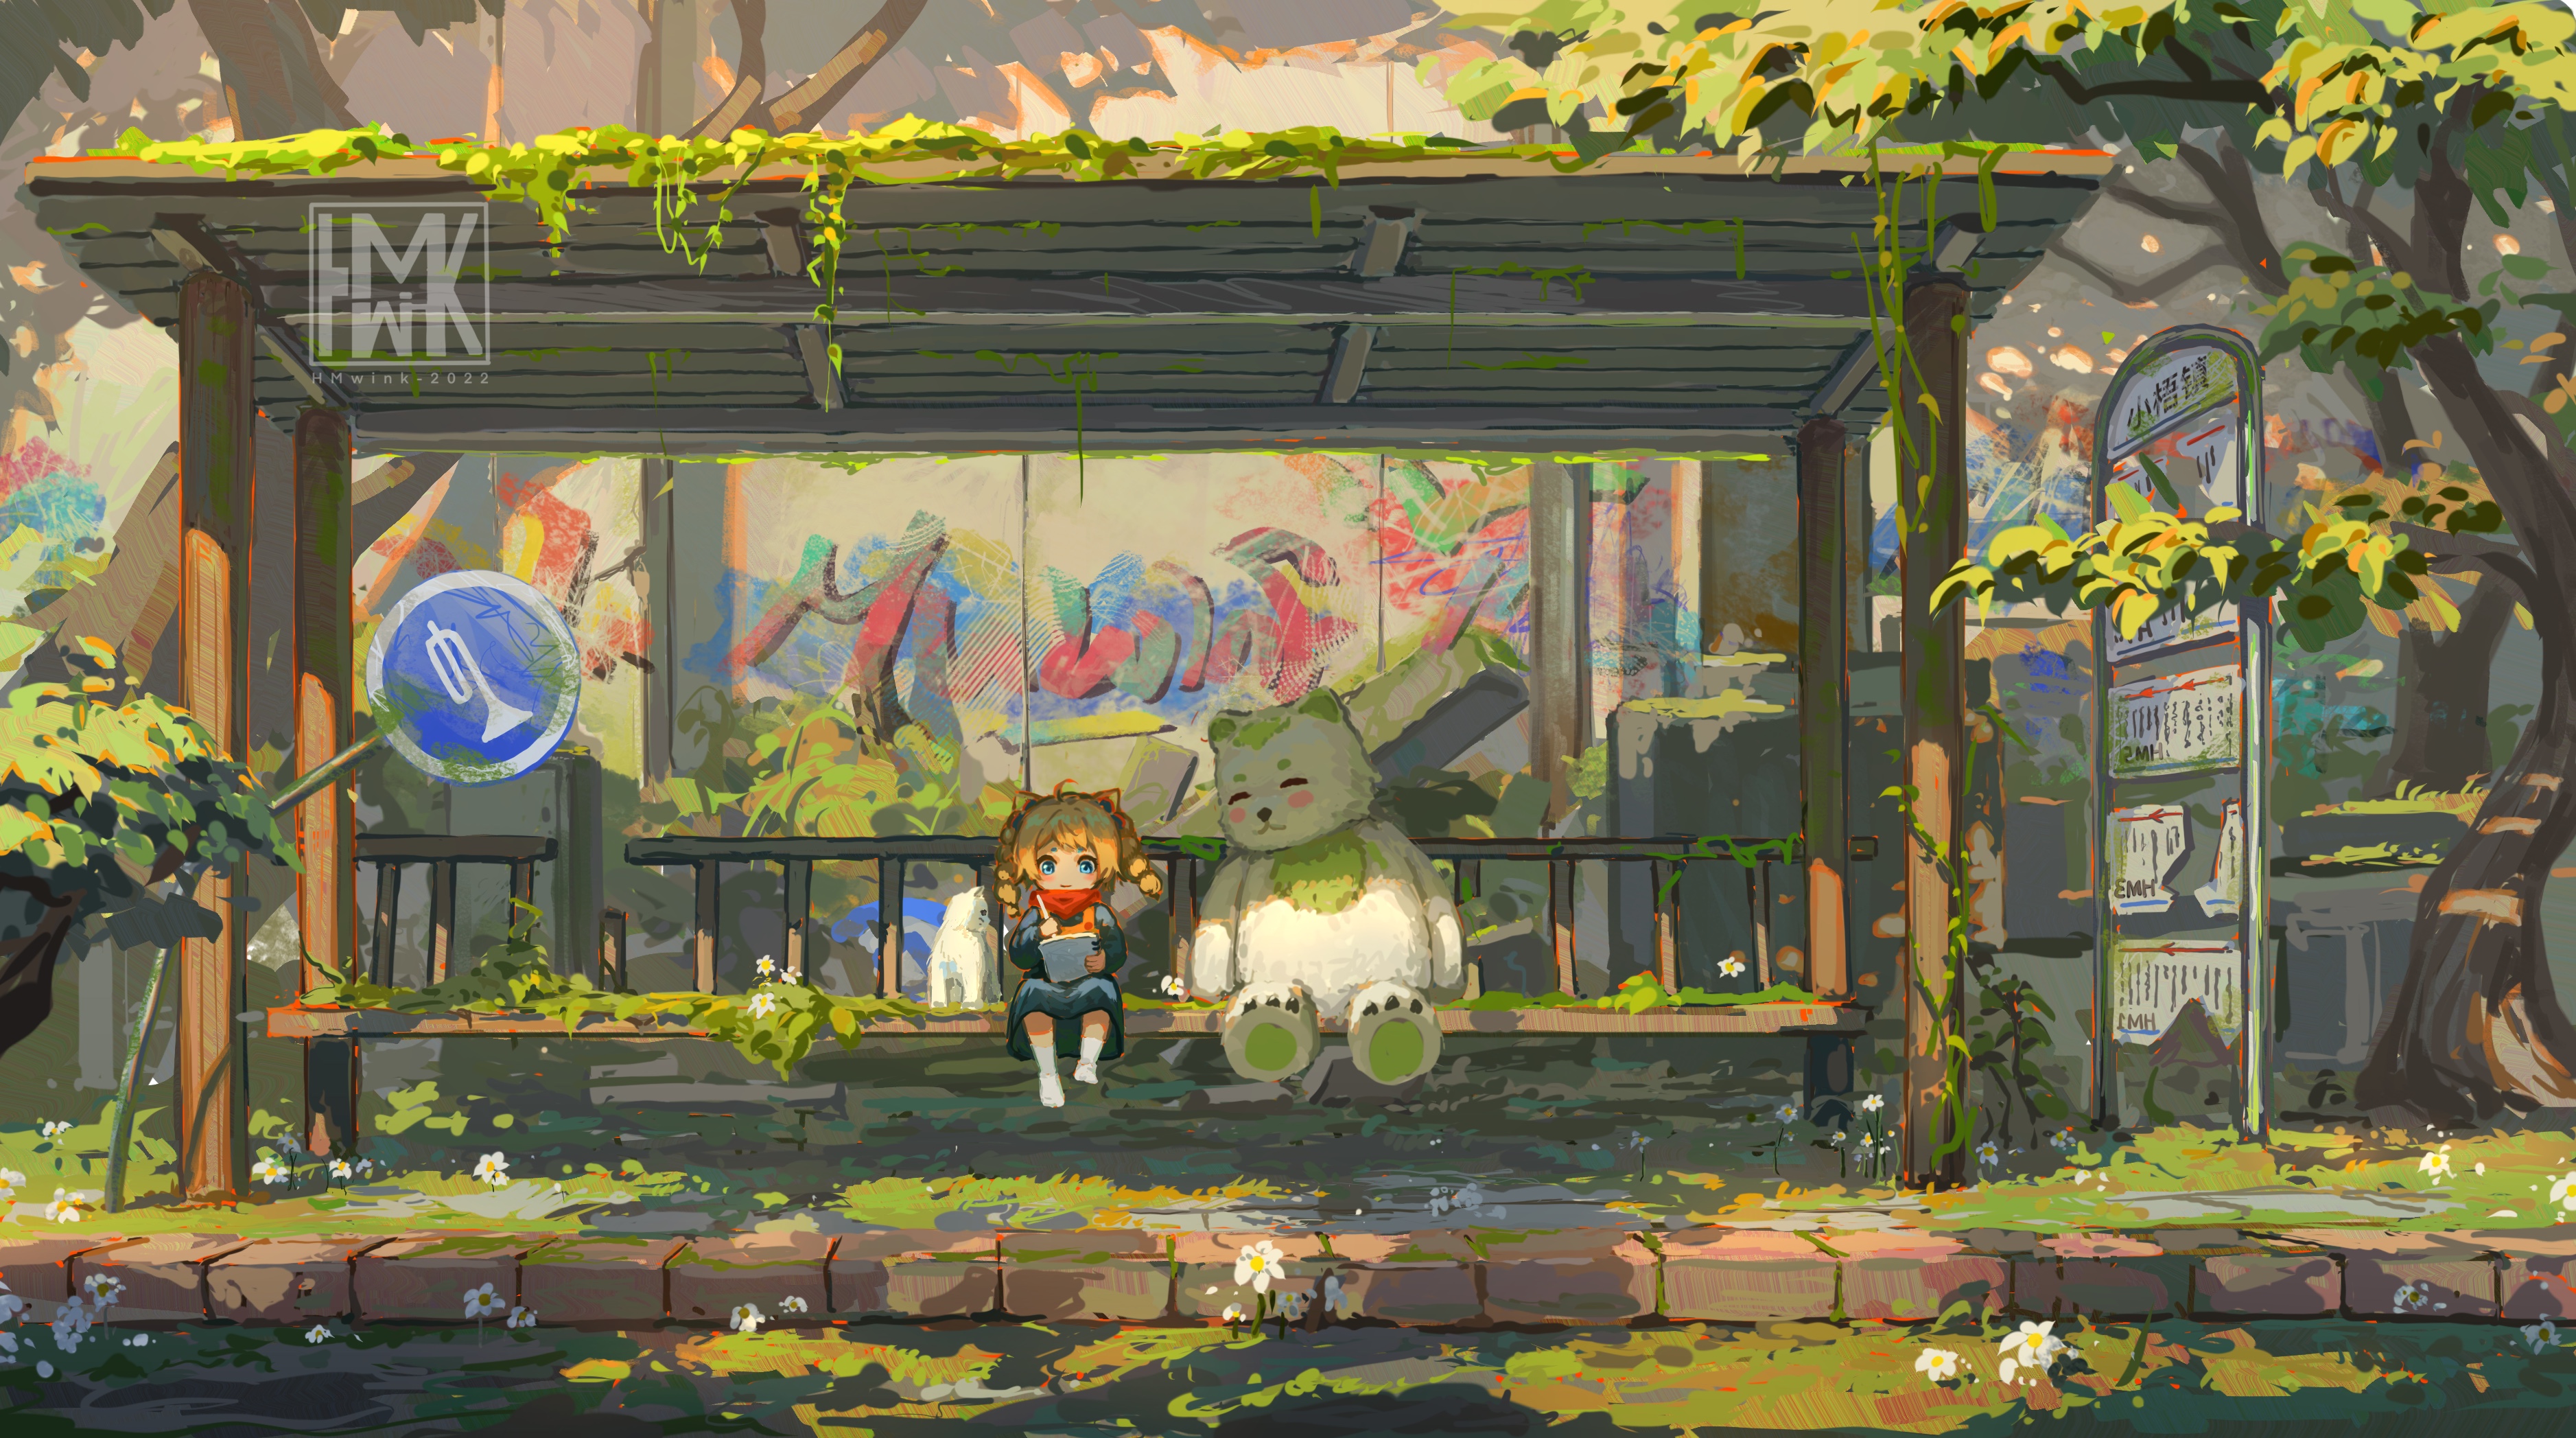 Anime 3754x2095 original characters illustration anime girls nature pointy ears animals bears bus stop Hua Ming wink